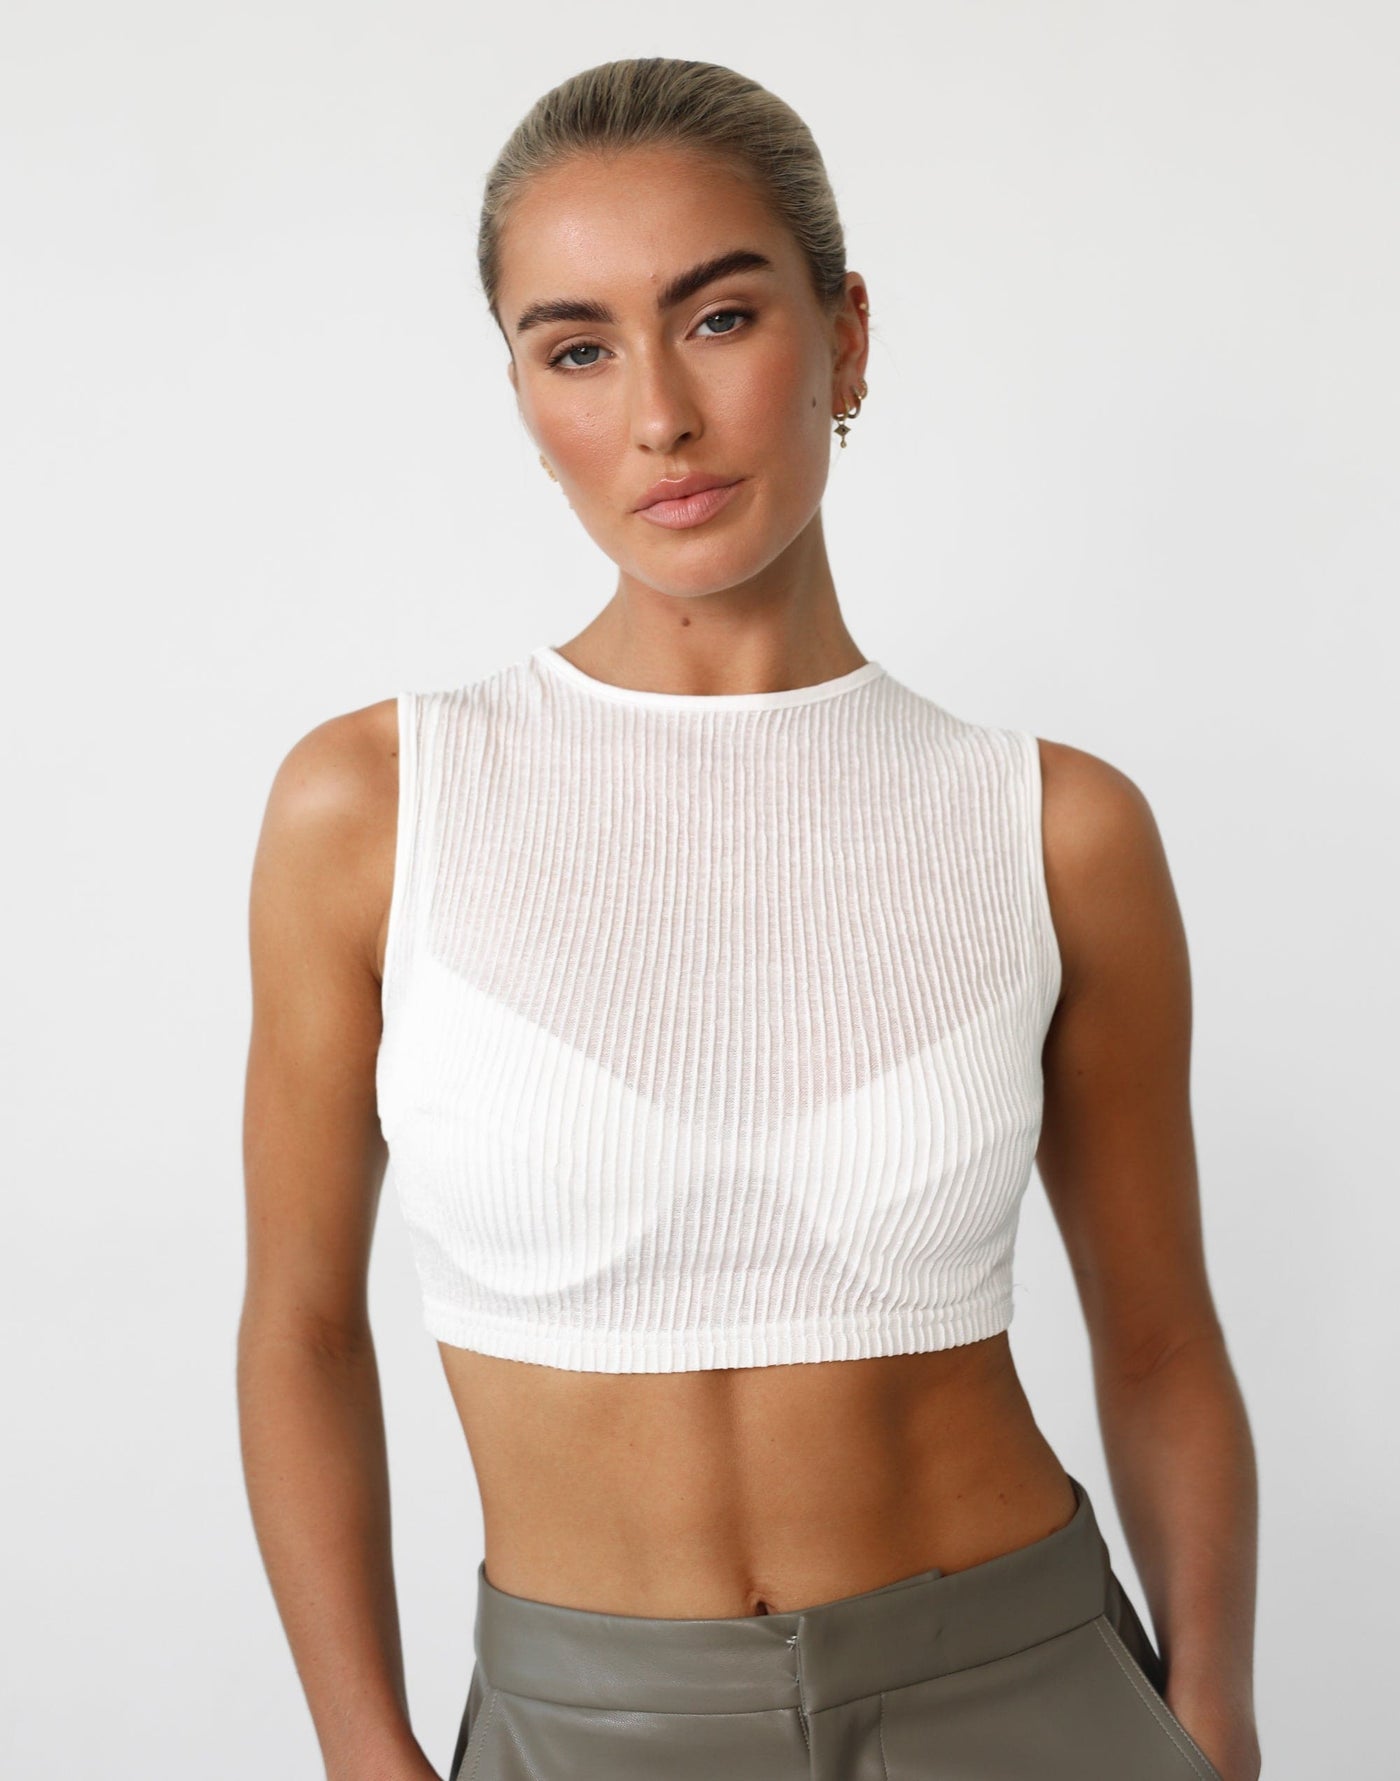 Kinetic Crop Top (White) - High Neck Textured Crop Top - Women's Top - Charcoal Clothing